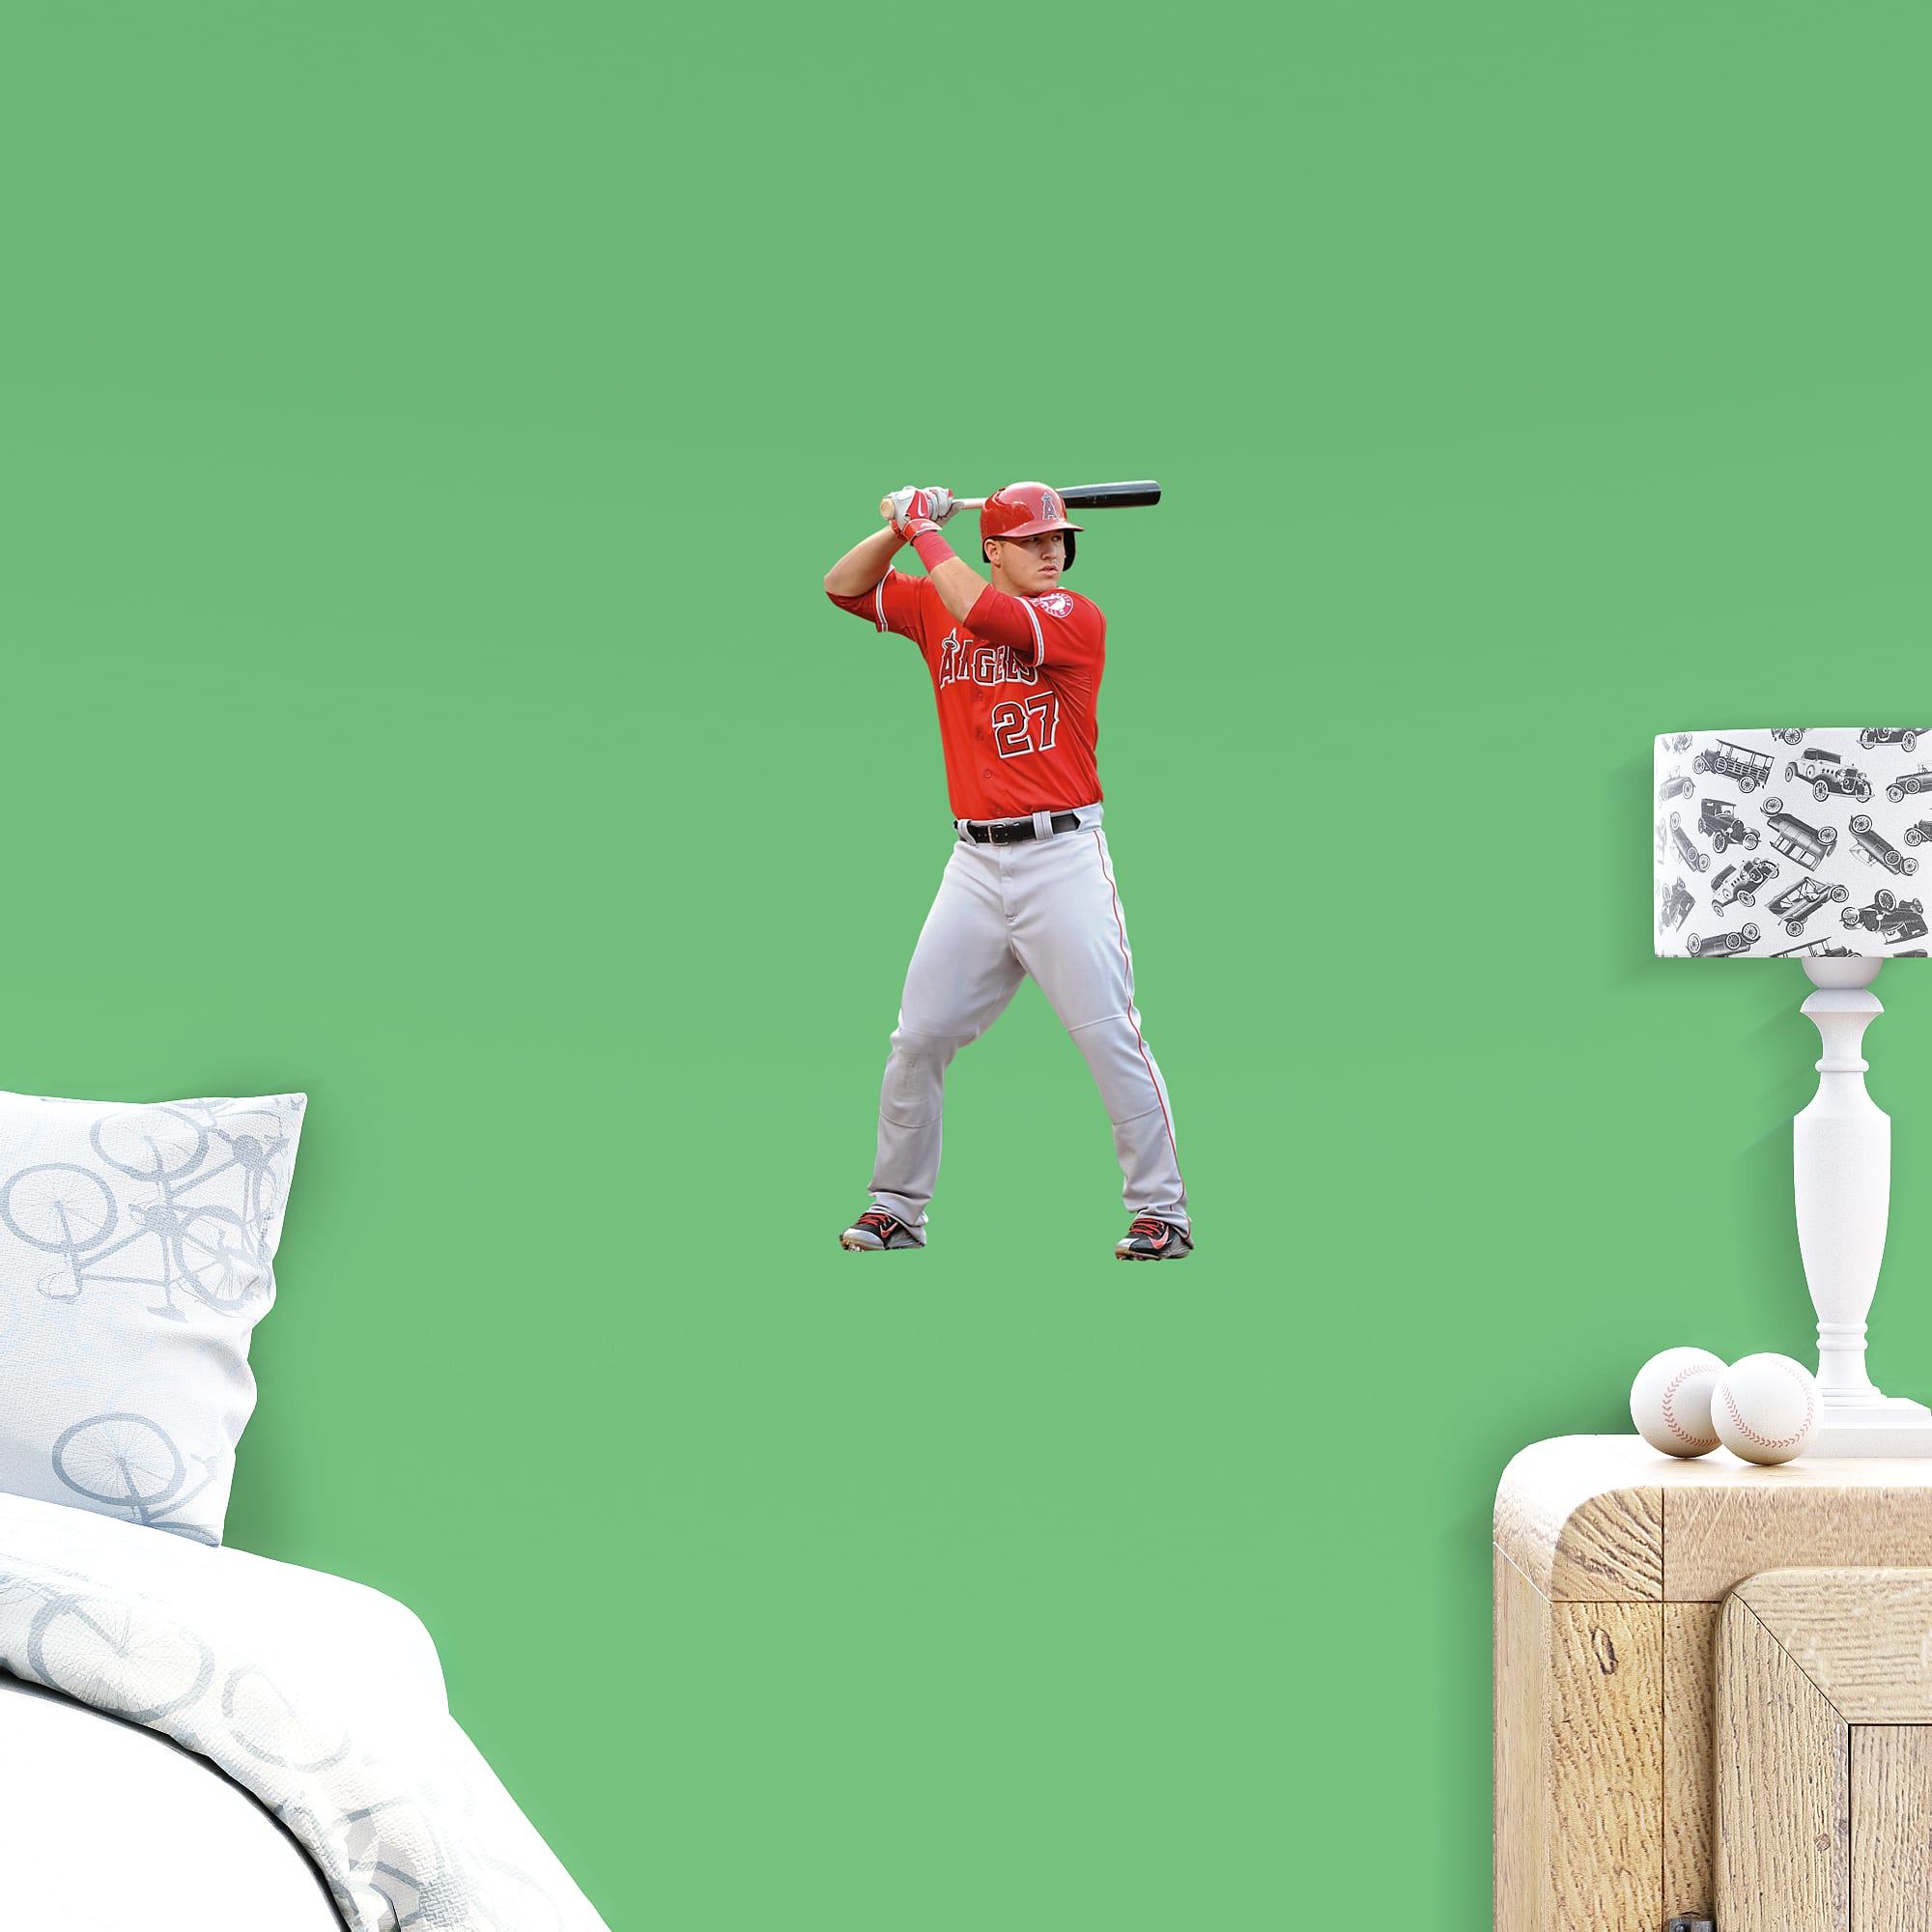 Mike Trout for LA Angels: Away - Officially Licensed MLB Removable Wall Decal 8.0"W x 17.0"H by Fathead | Vinyl